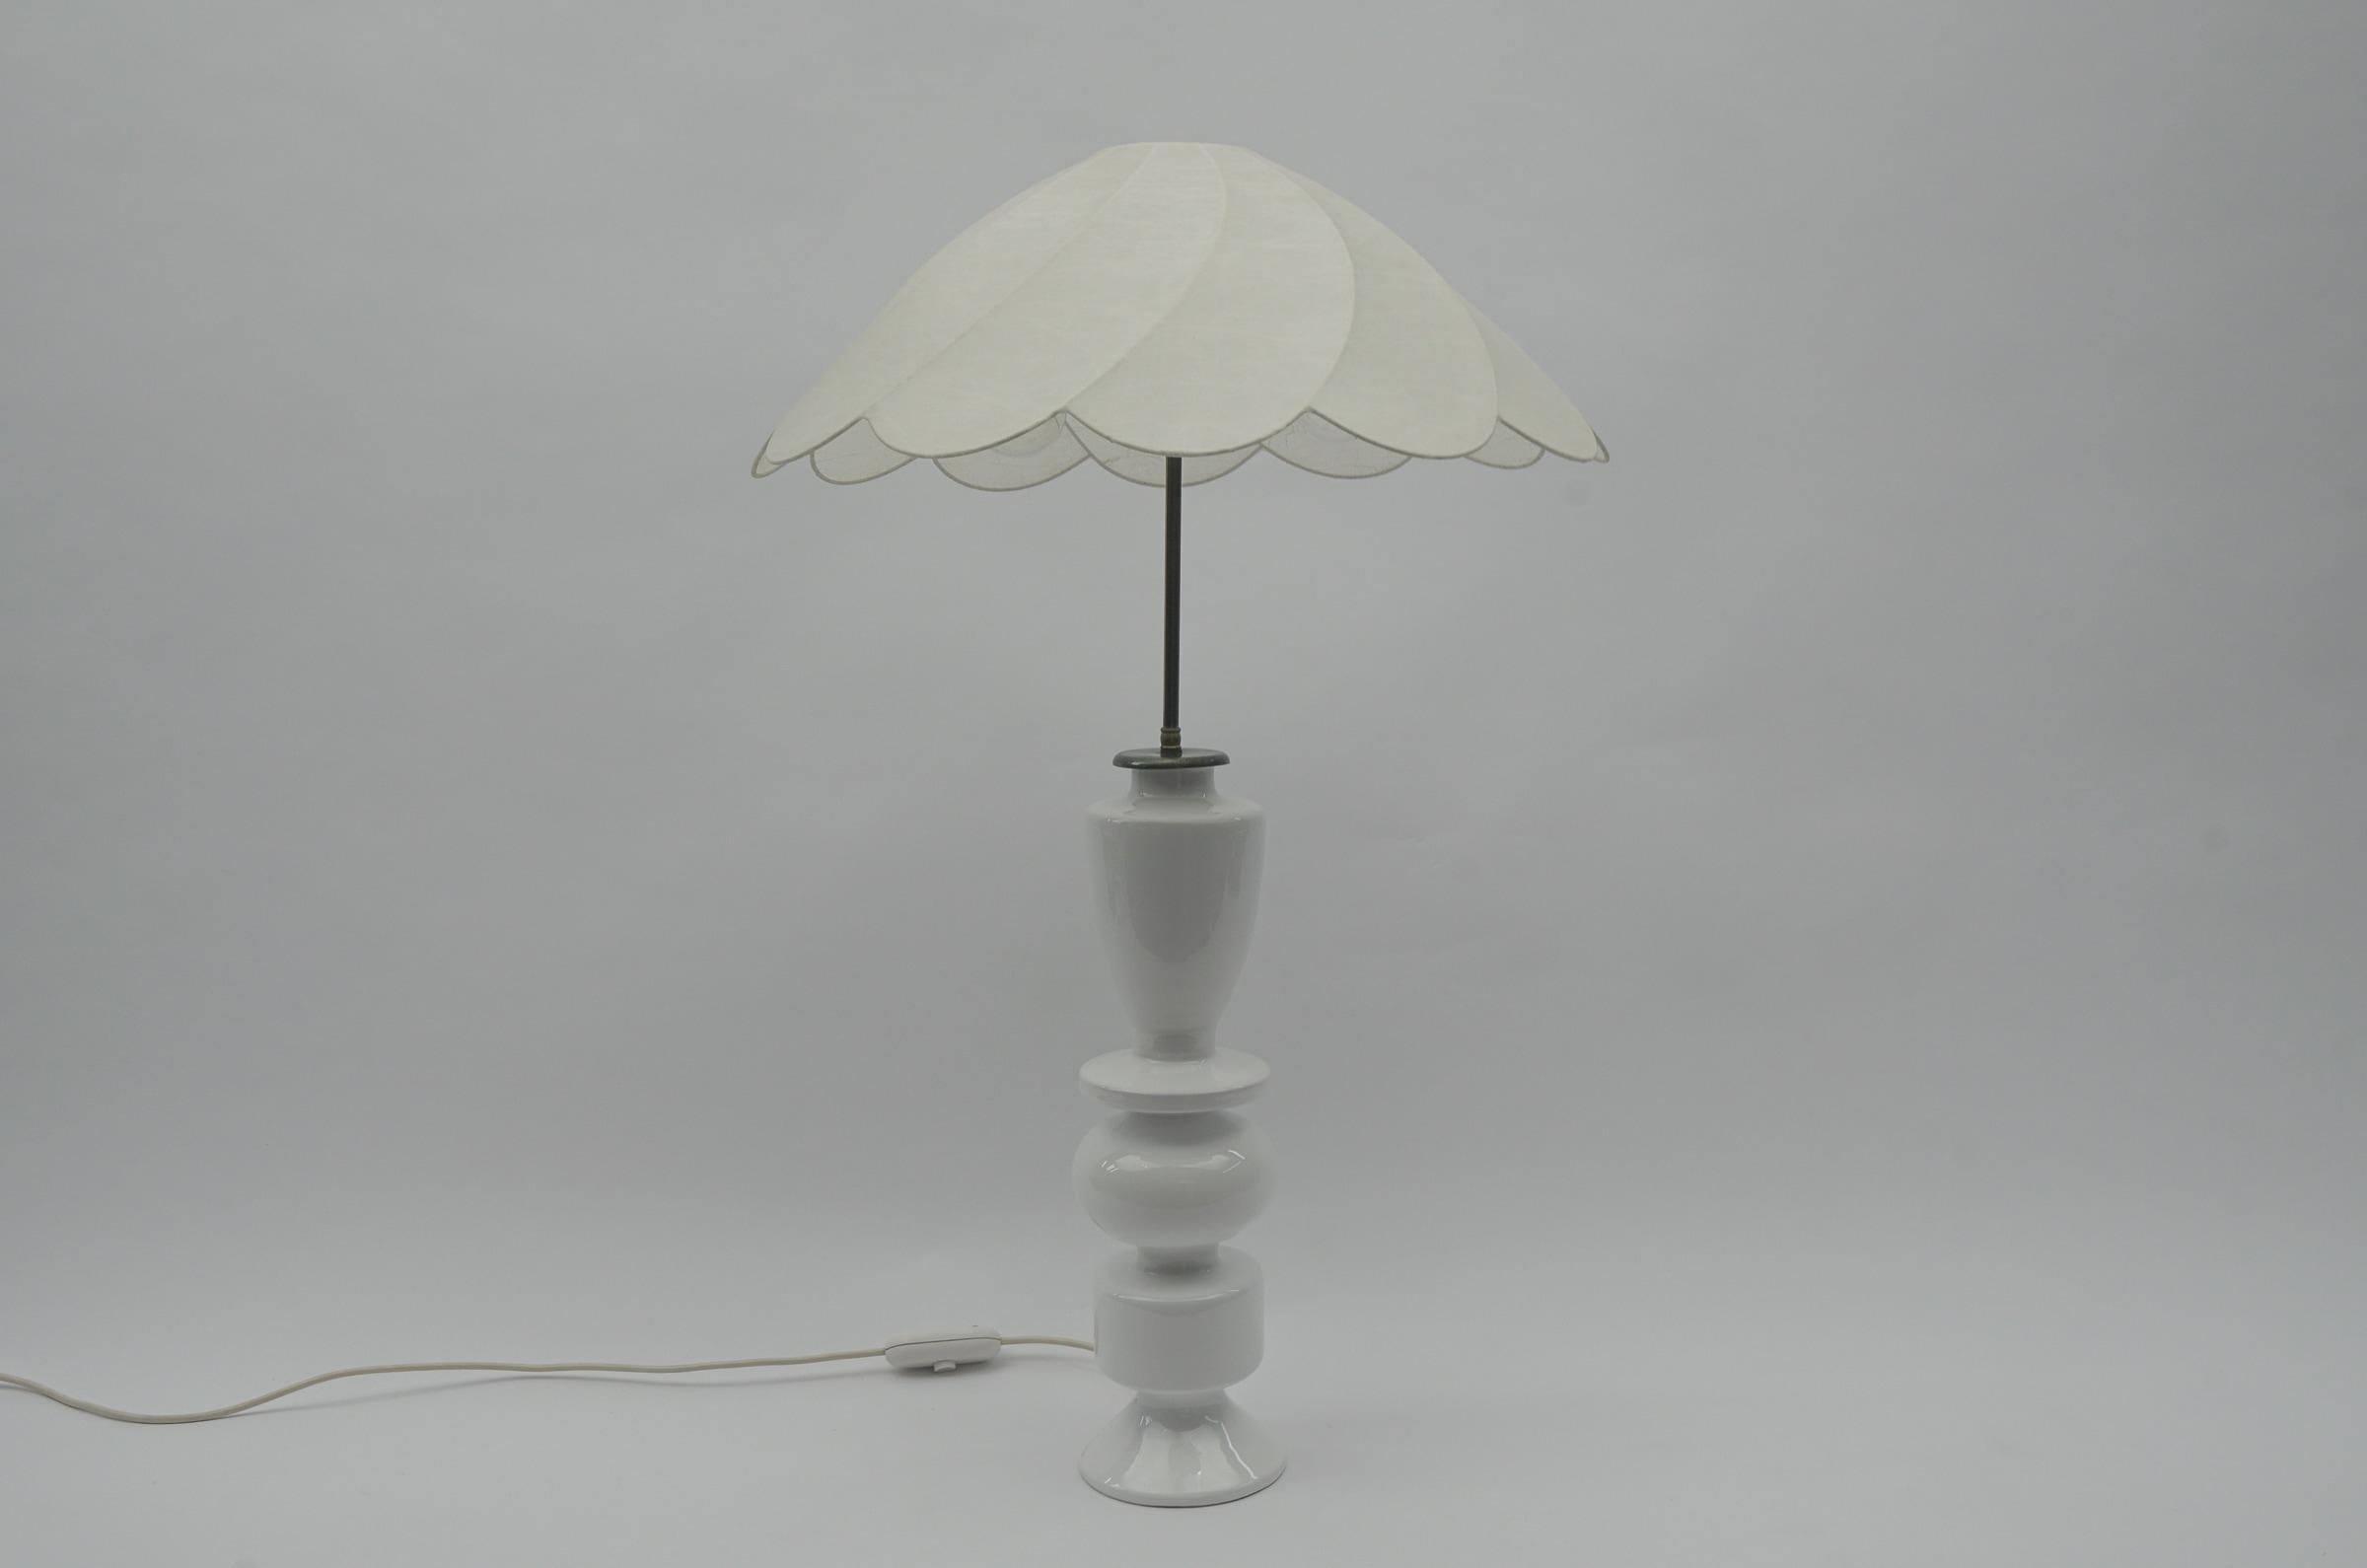 Cocoon lampshade has a diameter of 51cm, the ceramic base has a diameter of 13cm.

The lamp requires two E27 / E26 Edison screw bulb, is wired, functional and runs on both 110 / 230 volts.

Our lamps are tested, cleaned and are suitable for use in